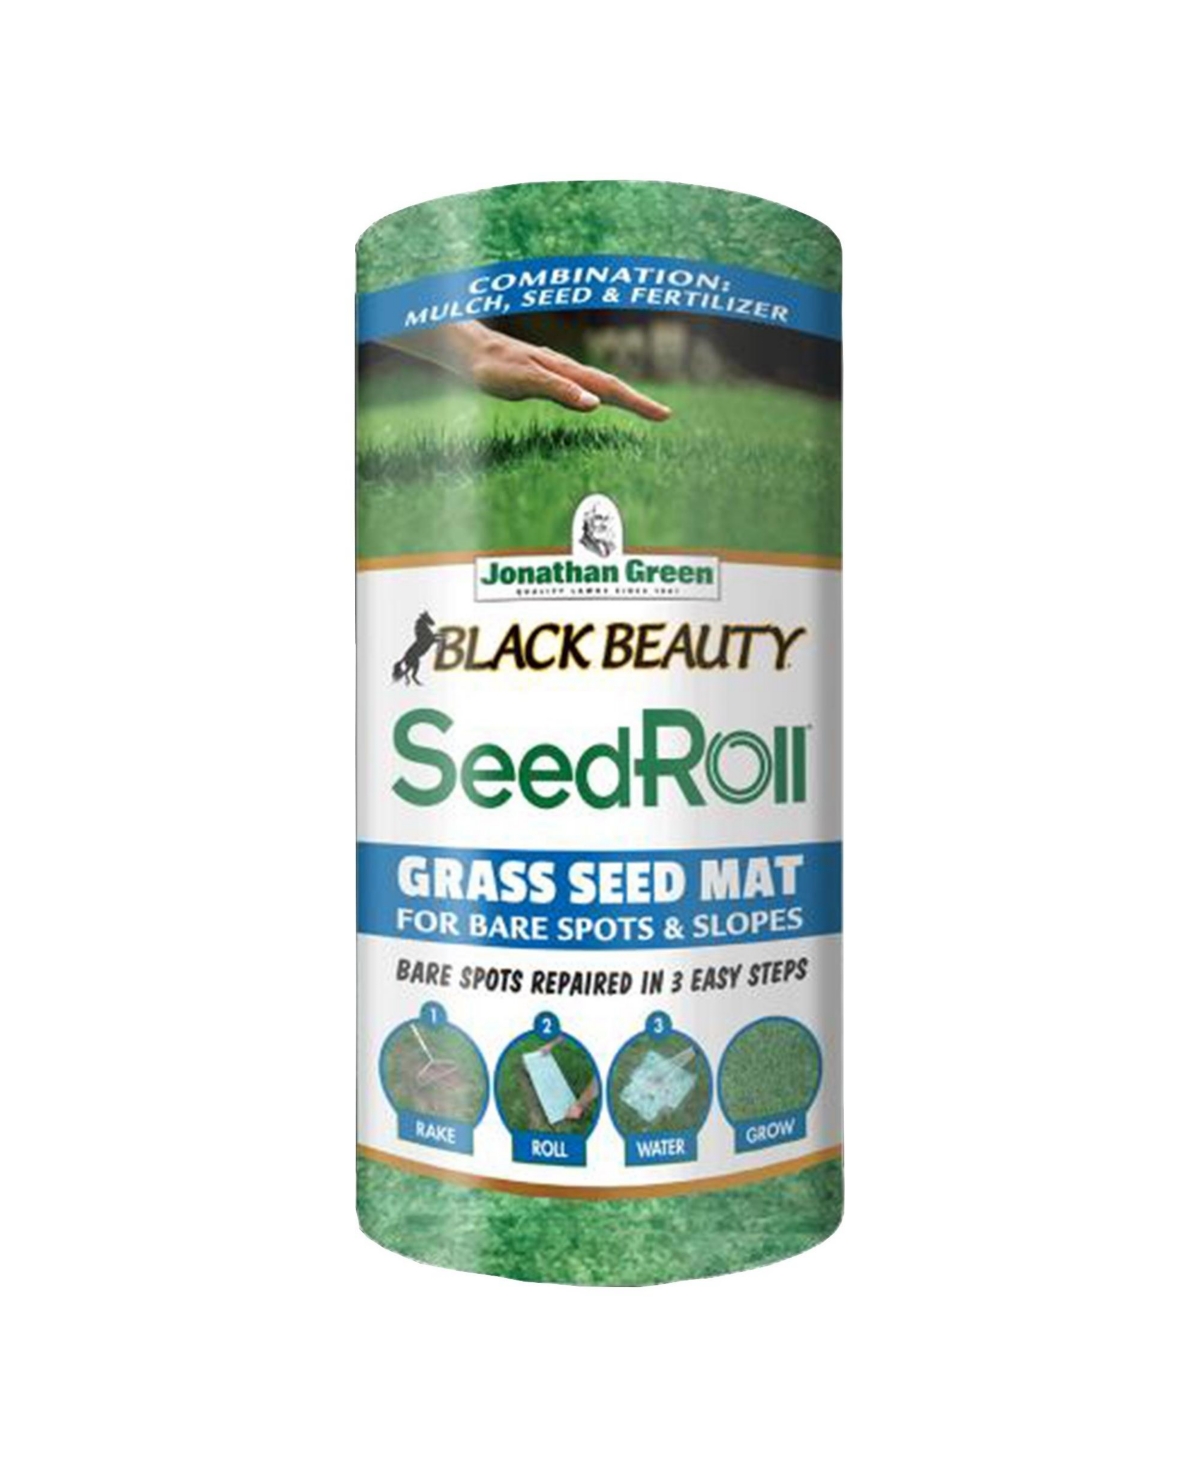 Black Beauty Biodegradable Grass Seed Roll -50 Sq Ft - Brown